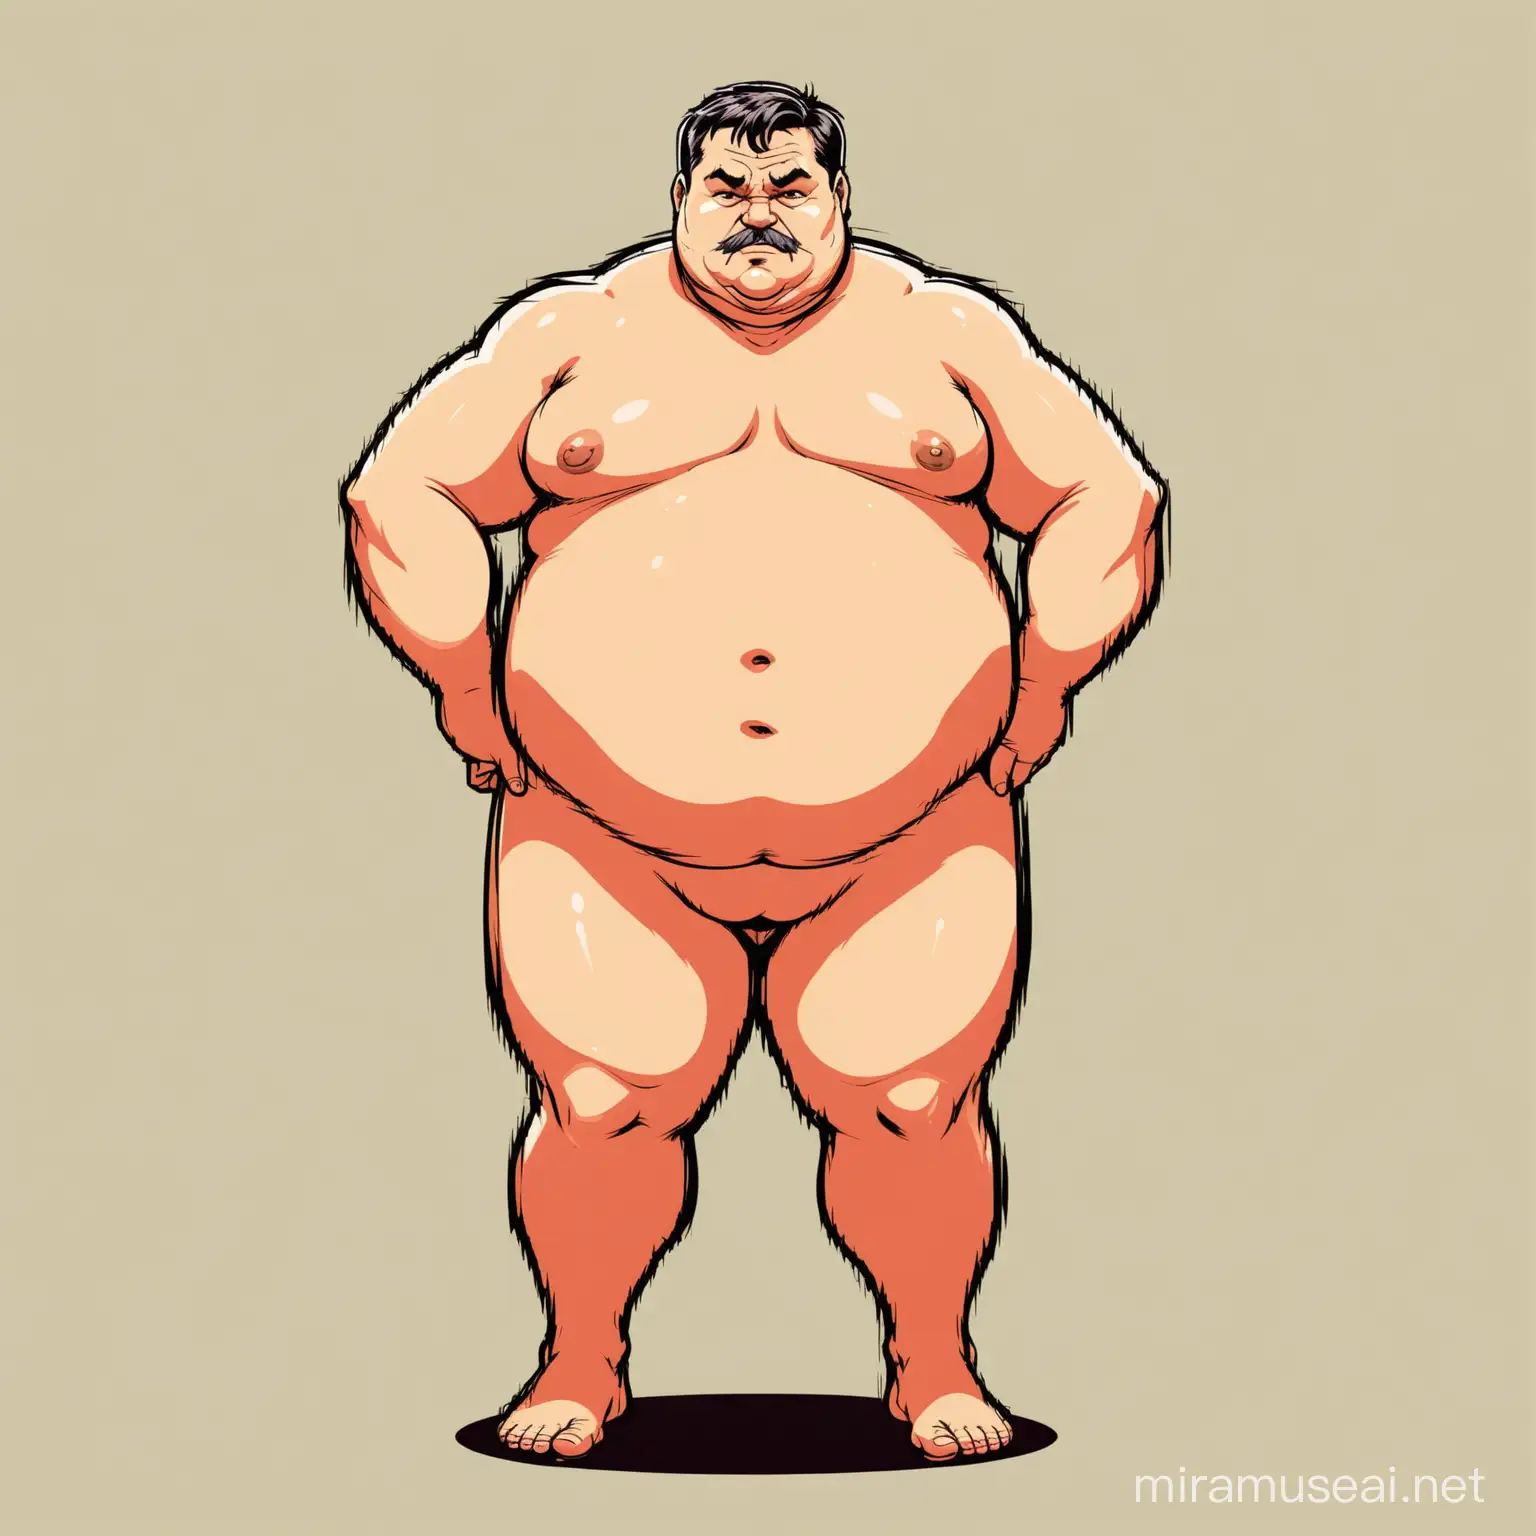 Comic Style Portrait of a Chubby MiddleAged Man